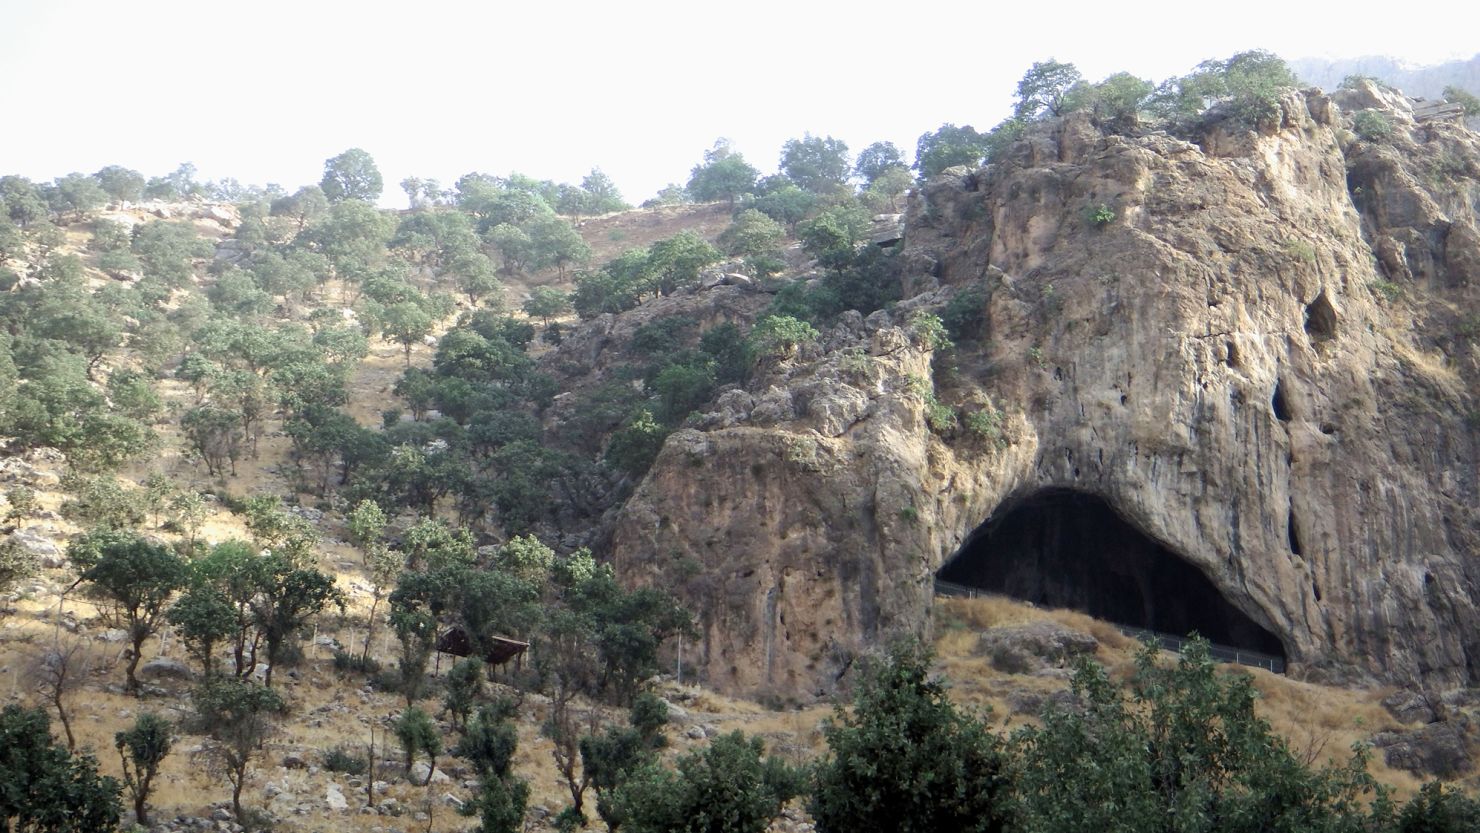 A view of Shanidar Cave in the Zagros Mountains of Iraqi Kurdistan is shown.